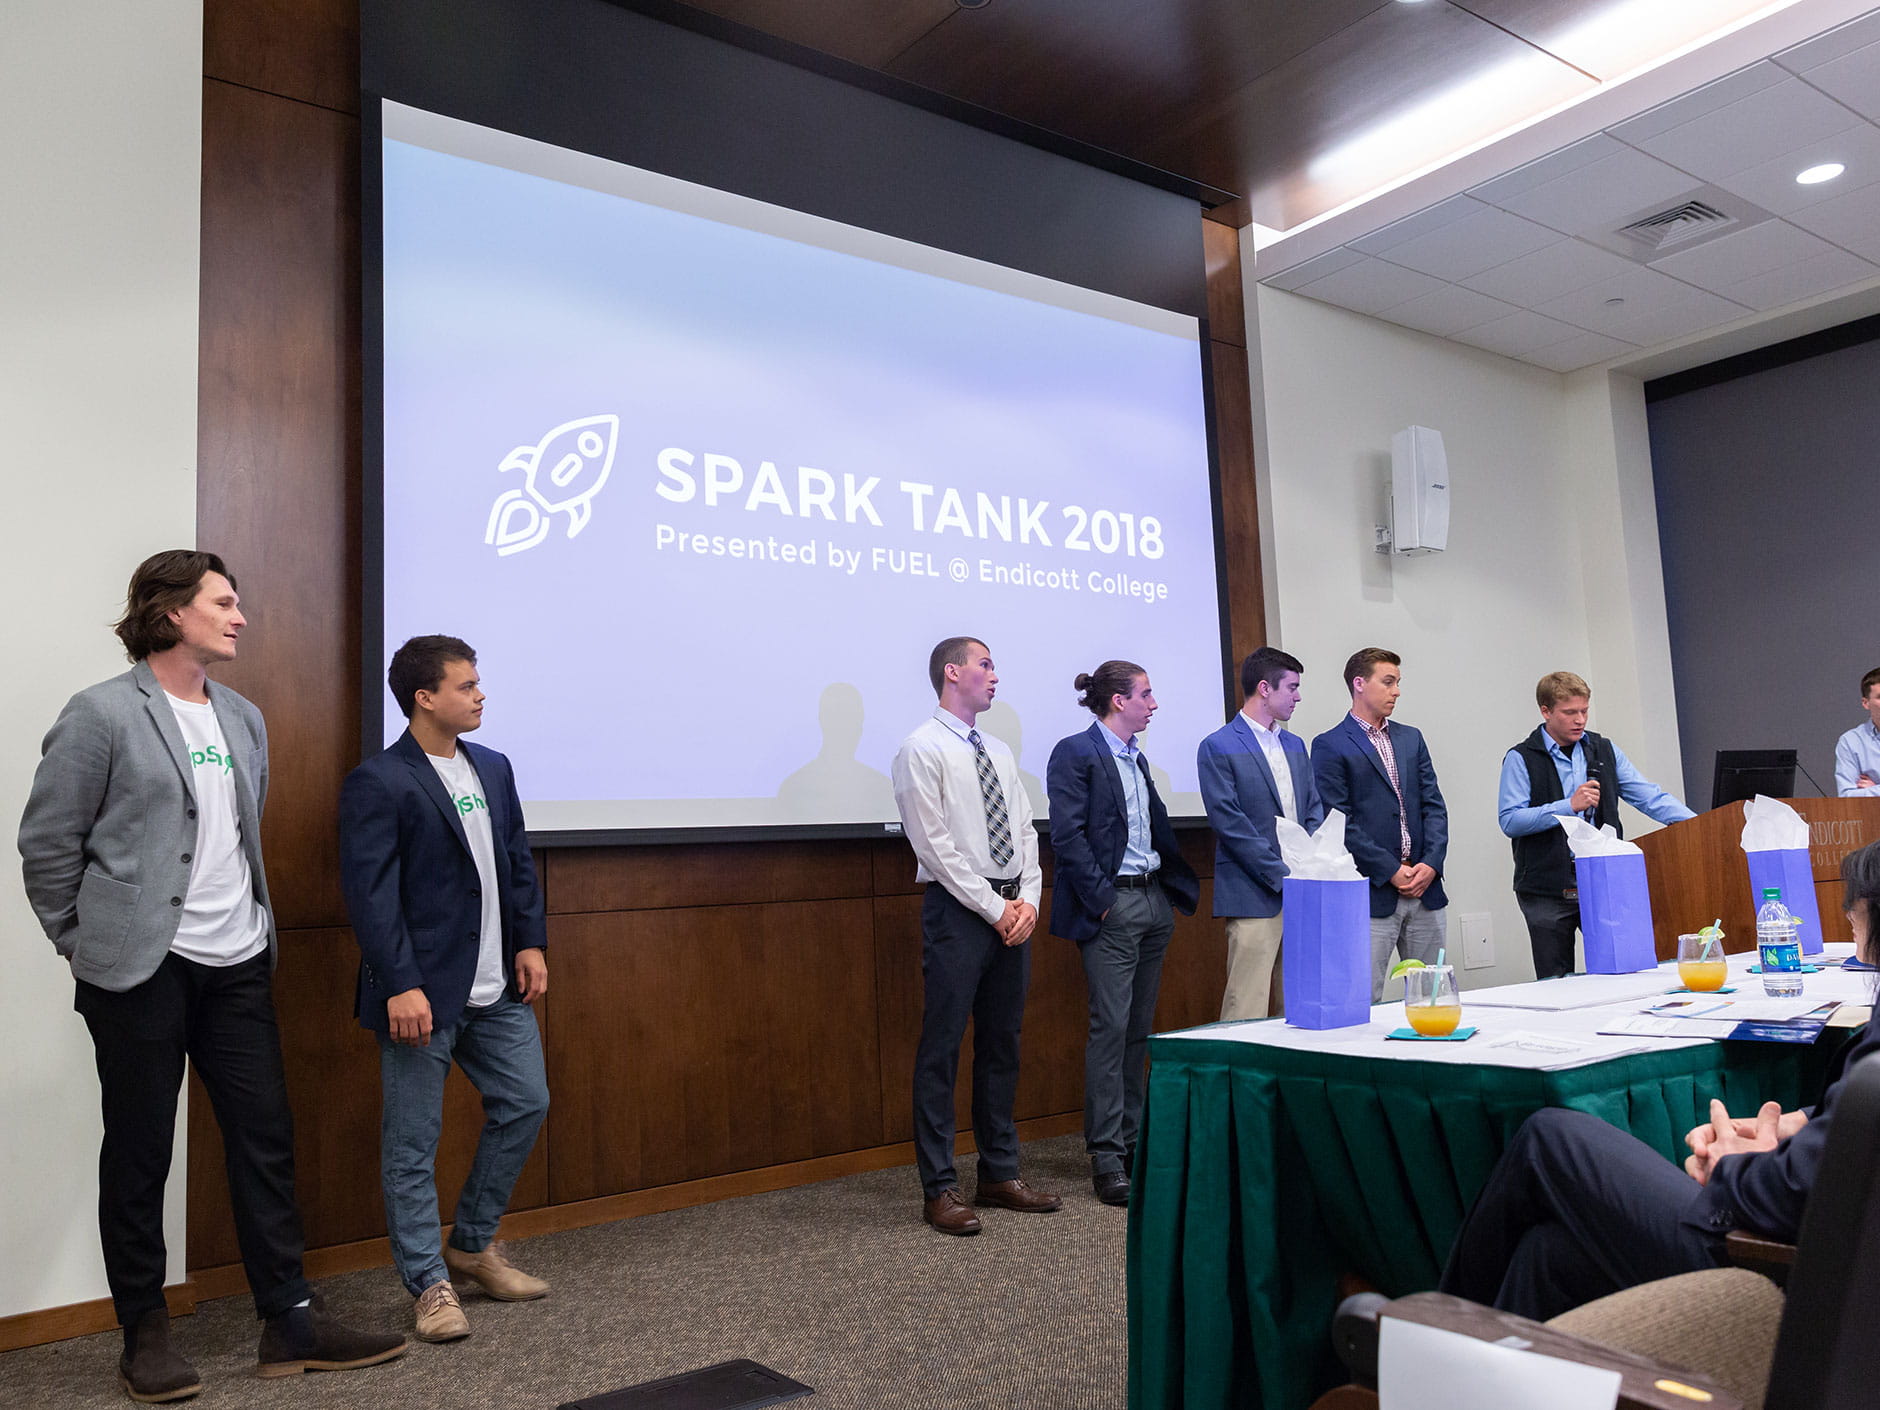 Finalists from last year's Spark Tank standing in the Klebanoff Auditorium waiting for the results of the competition. 